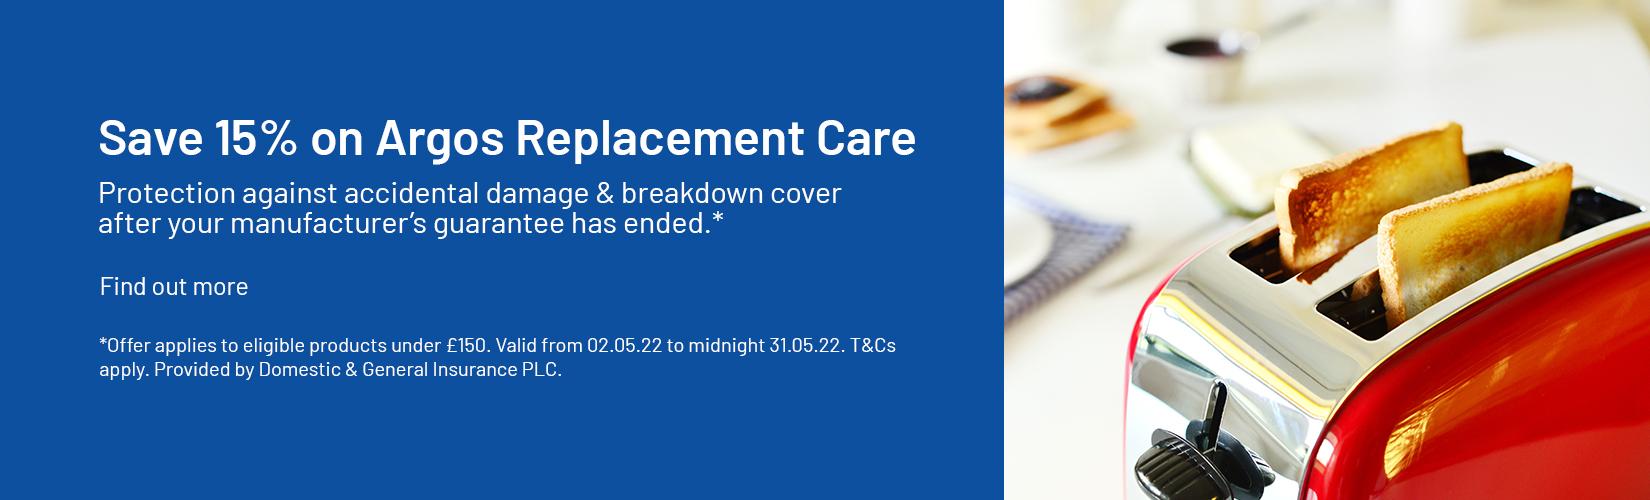 Save 15% on Argos Replacement Care. Protection against accidental damage & breakdown cover after your manufacturer’s guarantee has ended.*  Find out more.